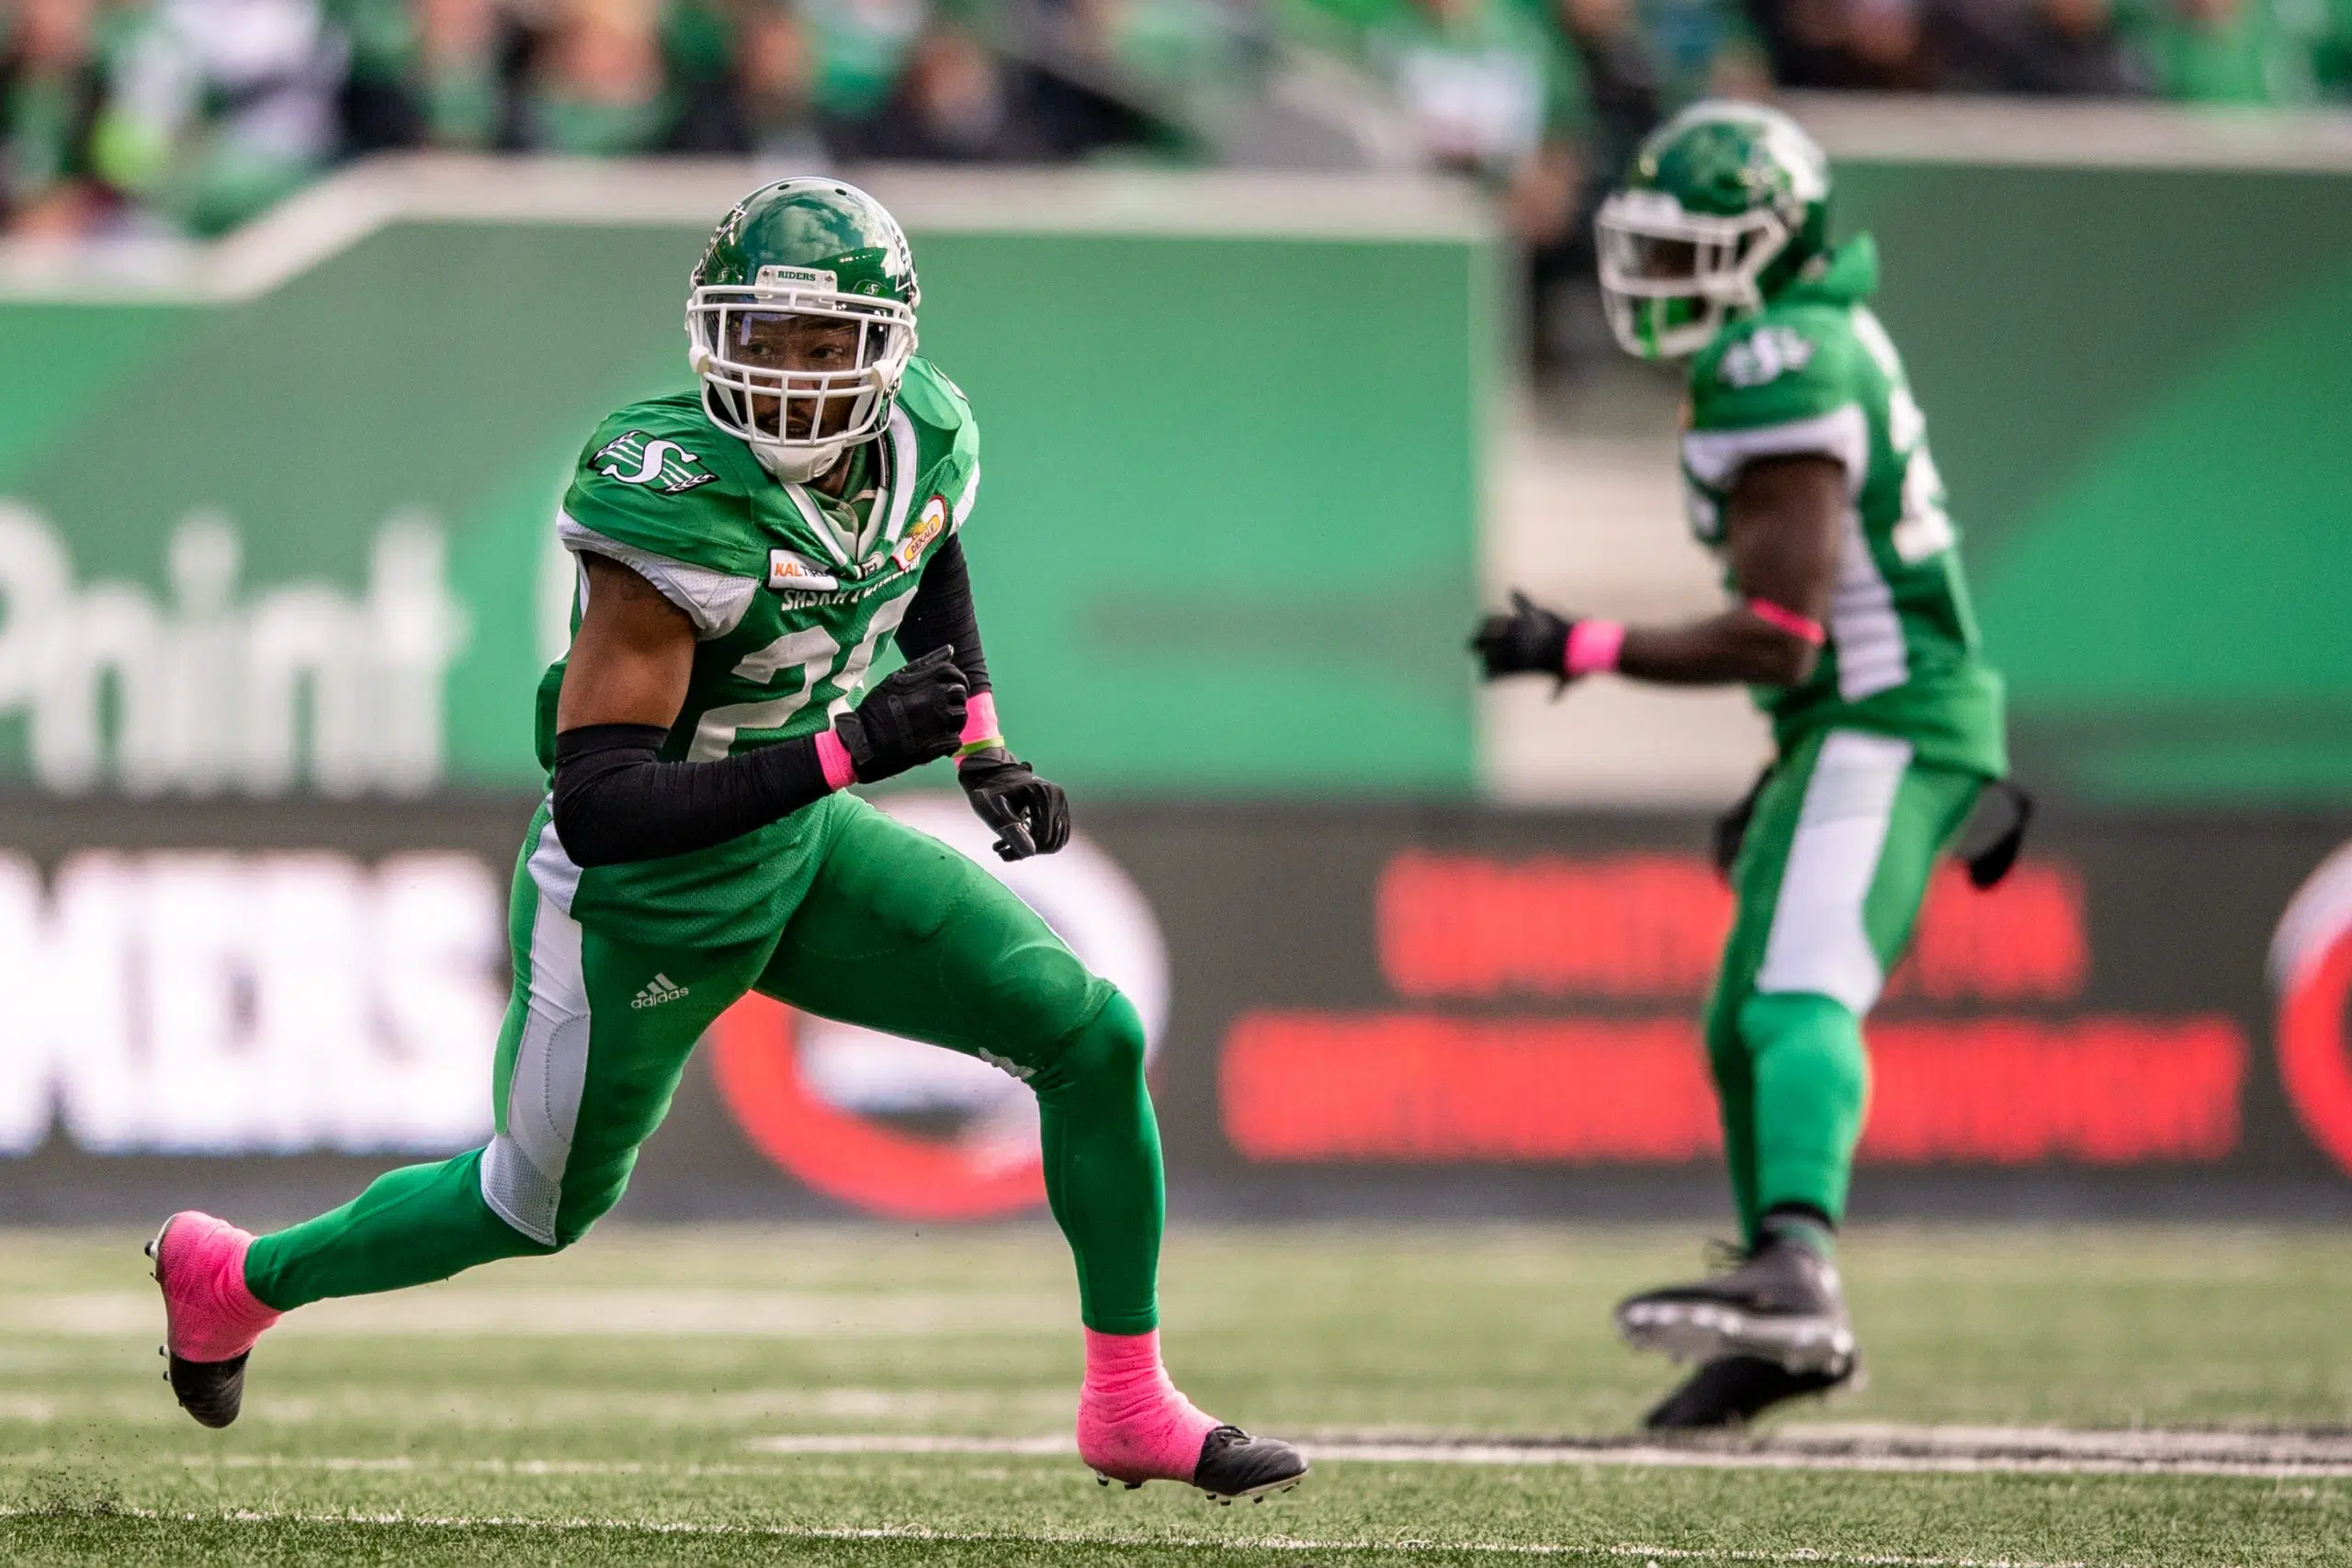 Riders secure 3 free agents in busy week before Christmas